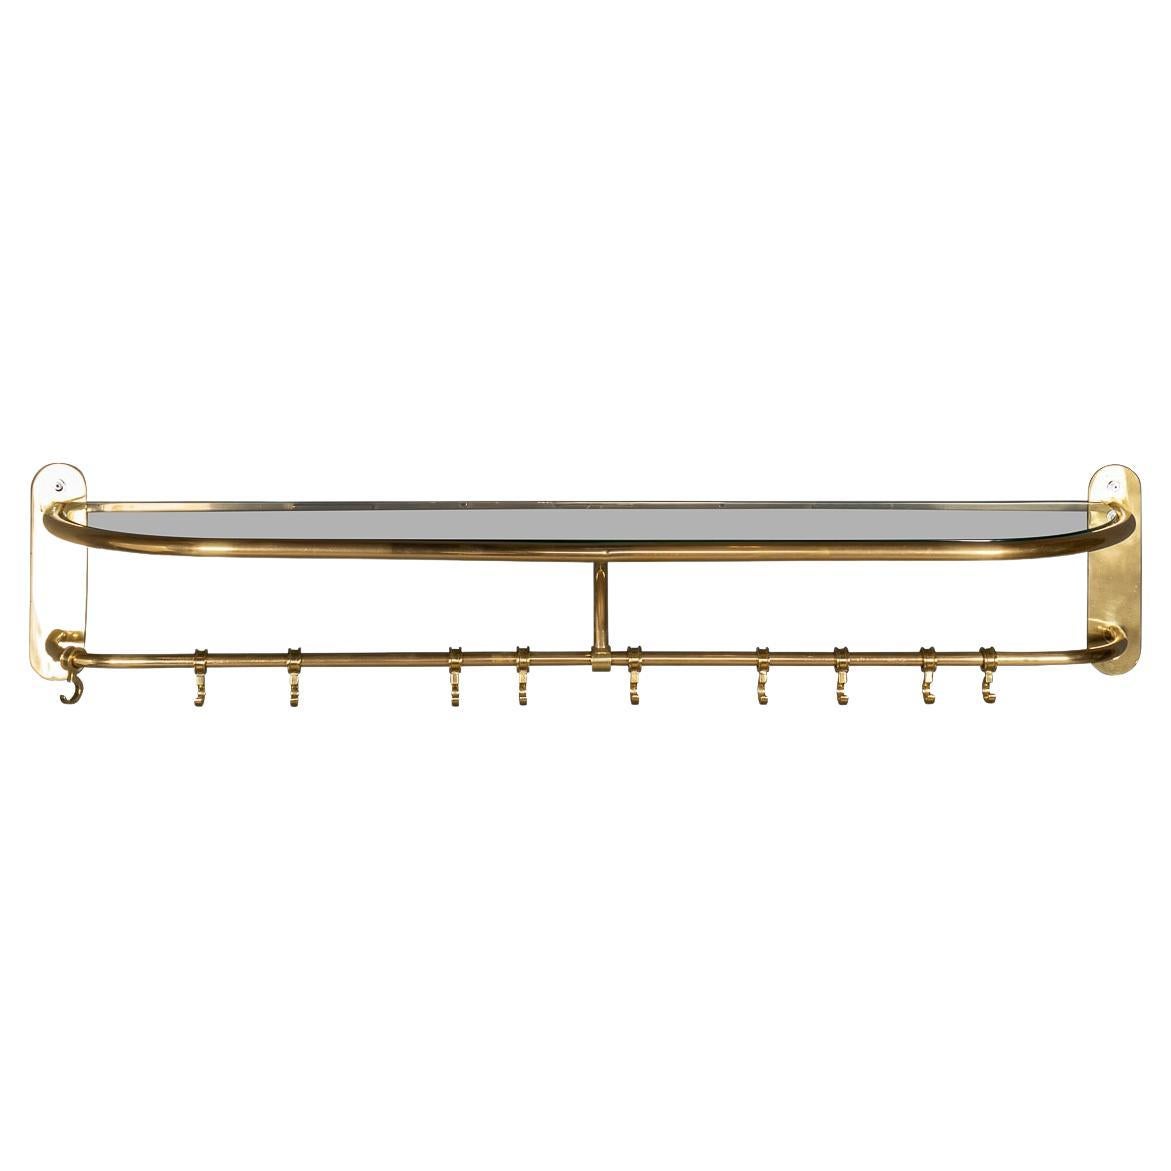 A Wall Mounted Brass Coat & Hat Rack For Sale